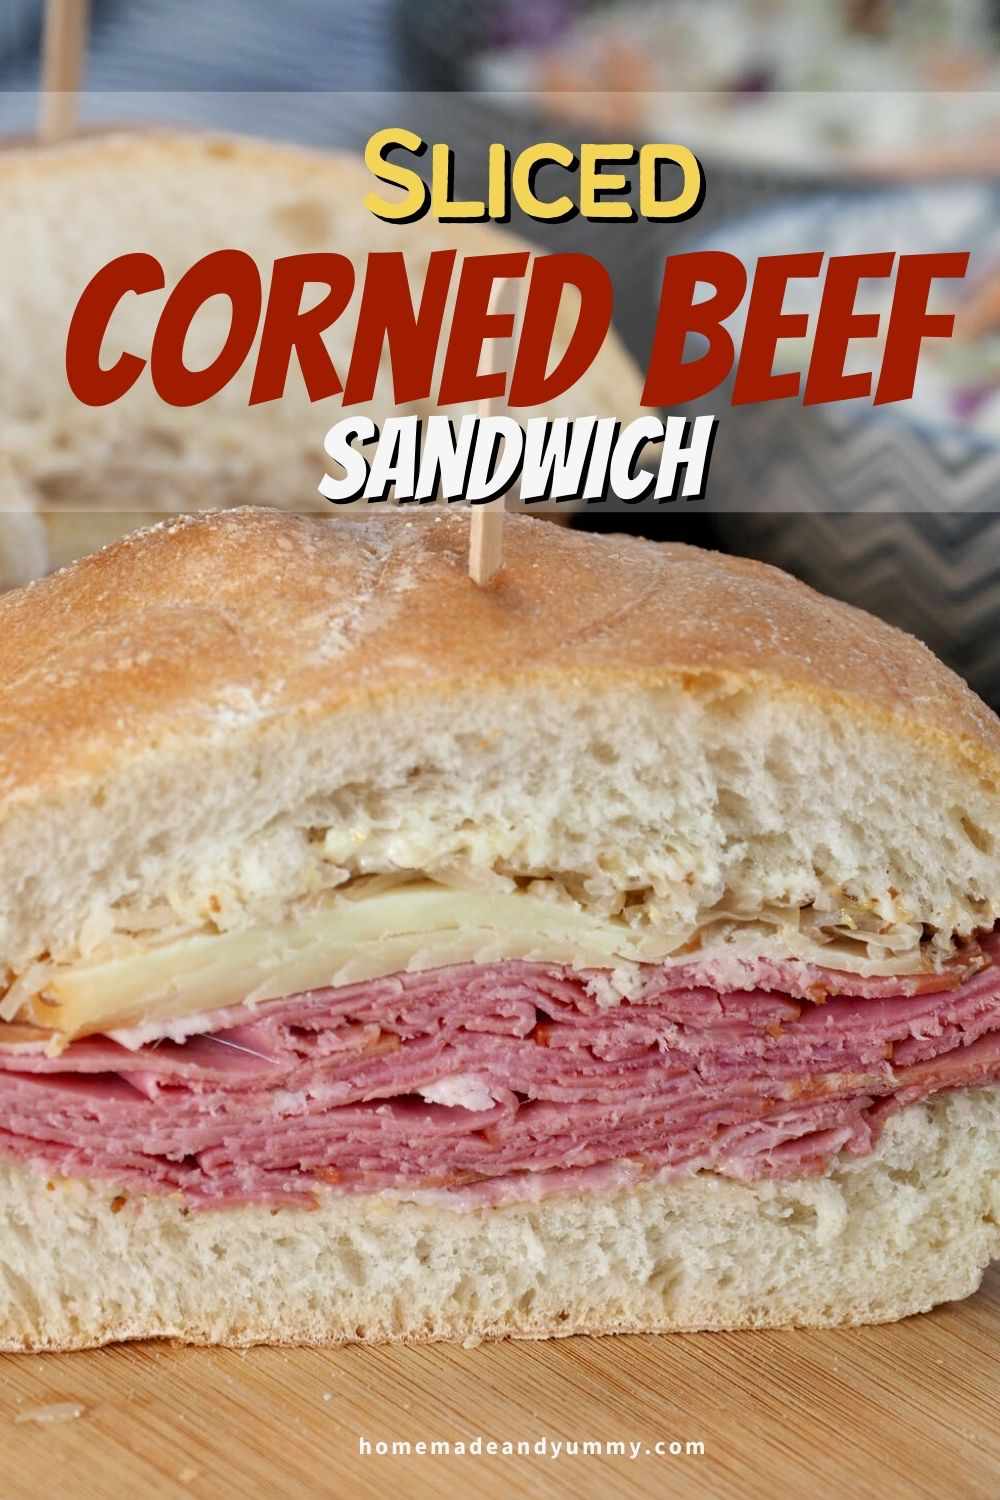 Deli sandwich with cold sliced corned beef.